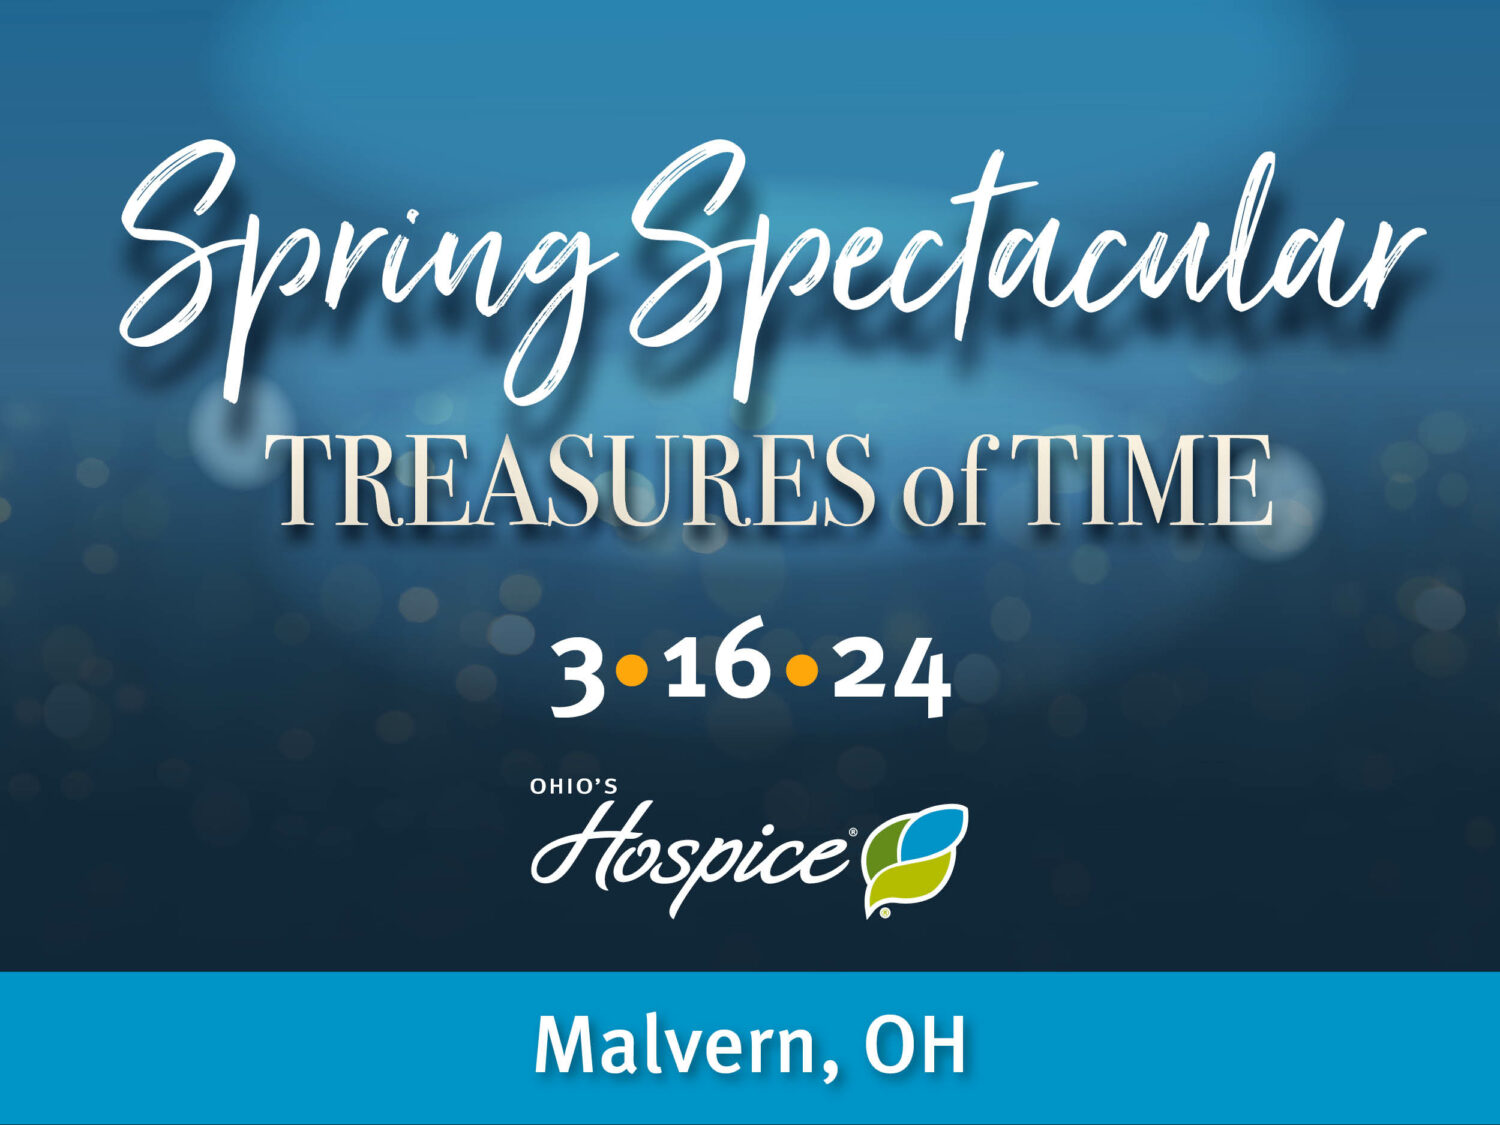 Spring Spectacular Treasures of Time 3.16.24